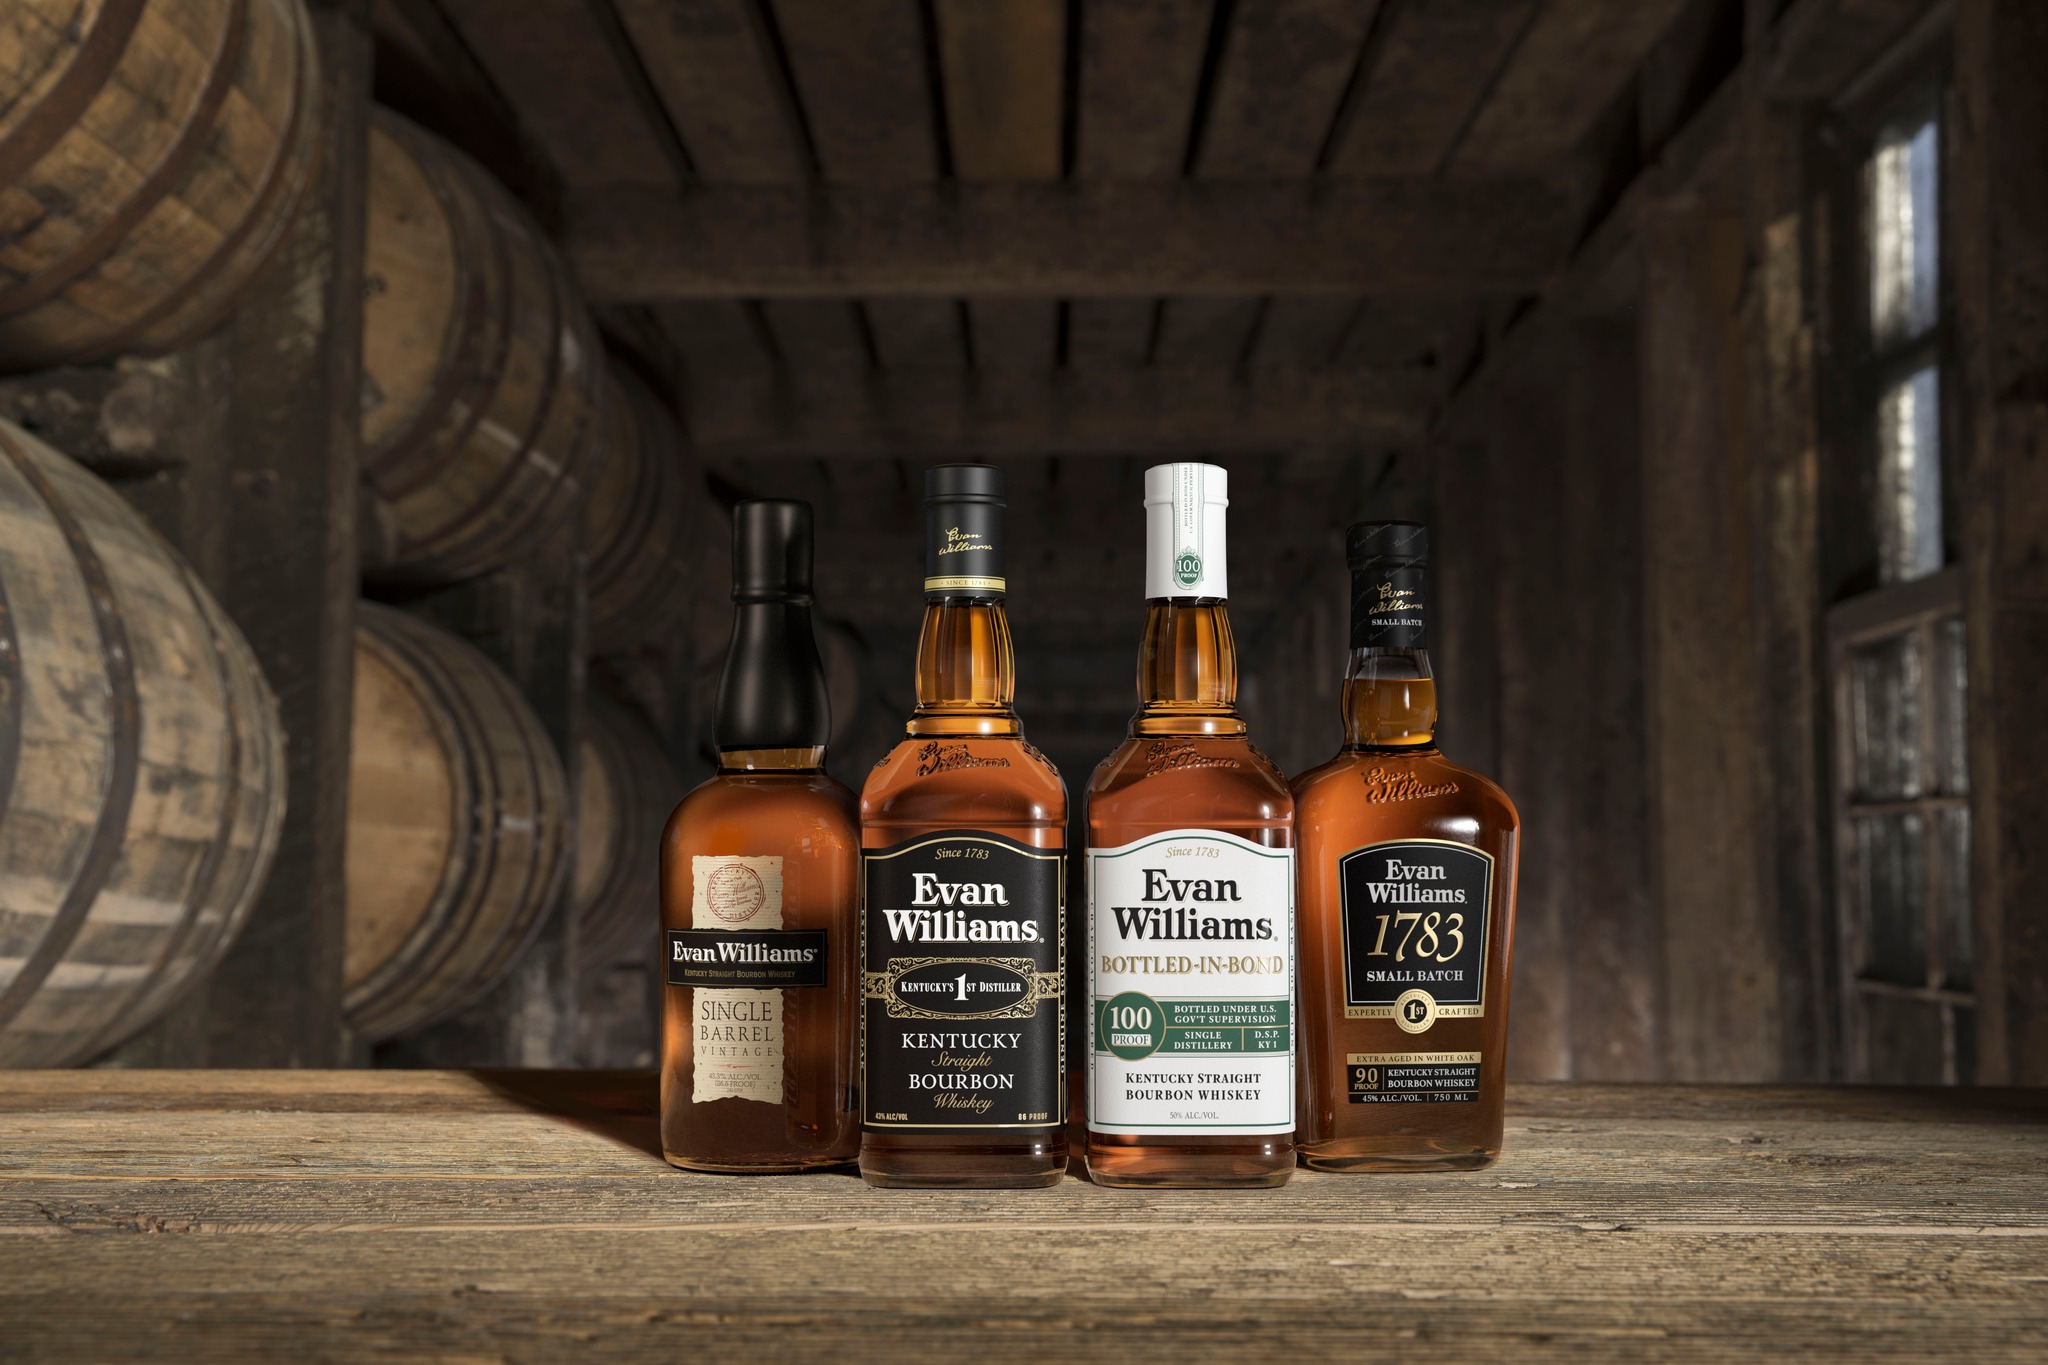 image of the current lineup of Evan Williams Bourbon courtesy of Evan Williams Distillery